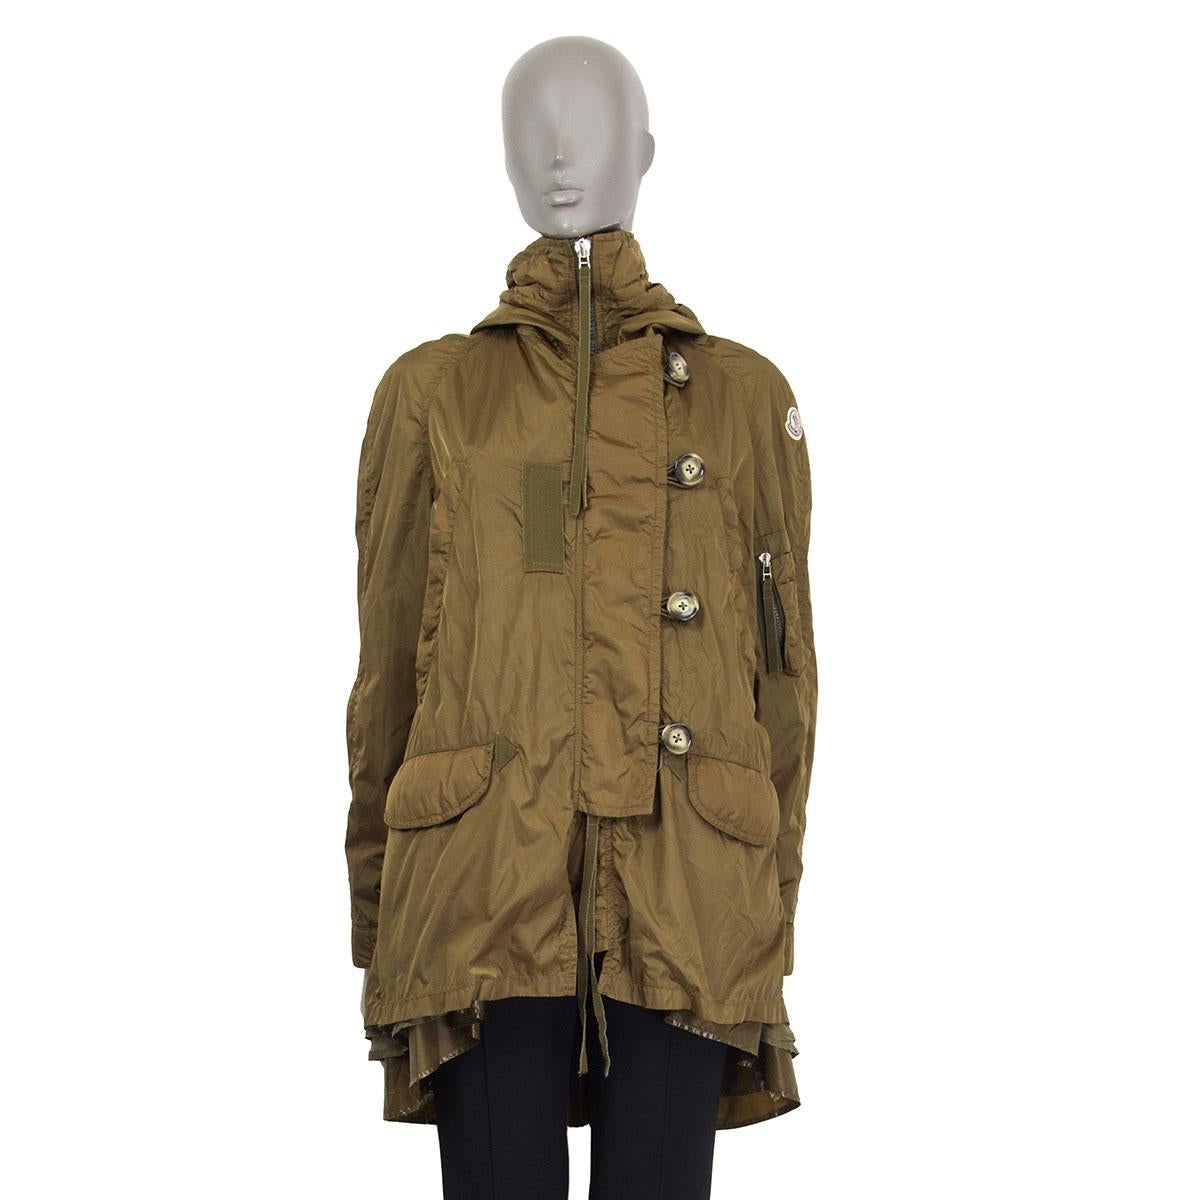 100% authentic Moncler hooded high-collar windbreaker jacket in olive-green polyamide (99%) and polyurethane (1%) with two slit pockets on the chest and two flap pockets on the front. Closes with a concealed zipper and four buttons on the front. Has